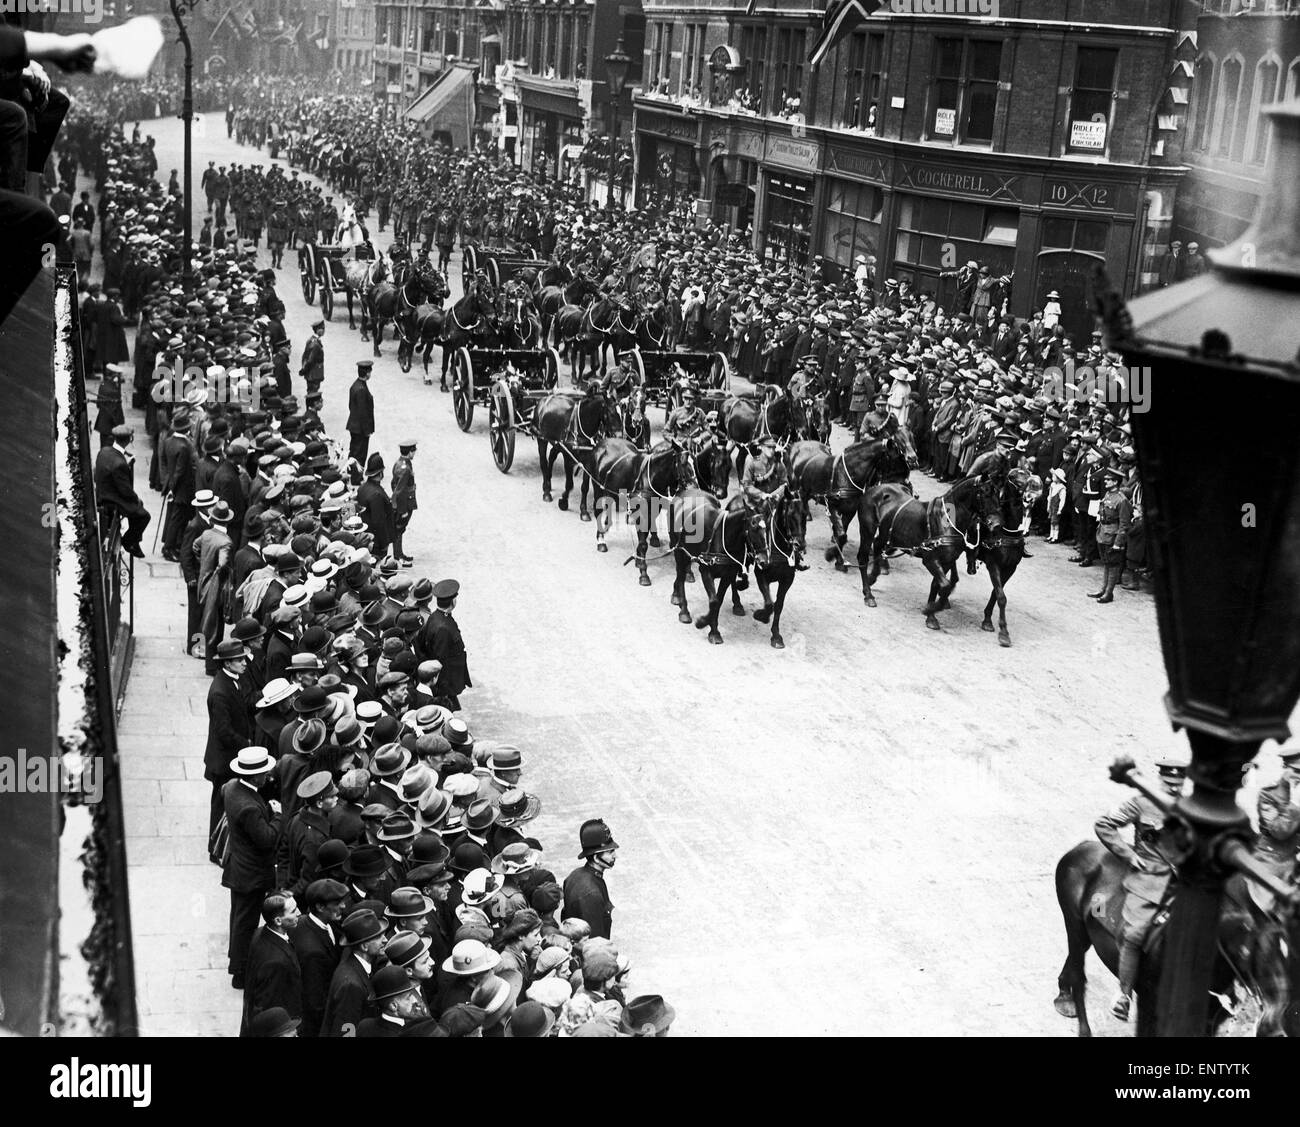 Members of the Royal Artillery seen here parading through the streets of London during the 1919 victory parade. 19th July 1919 Stock Photo